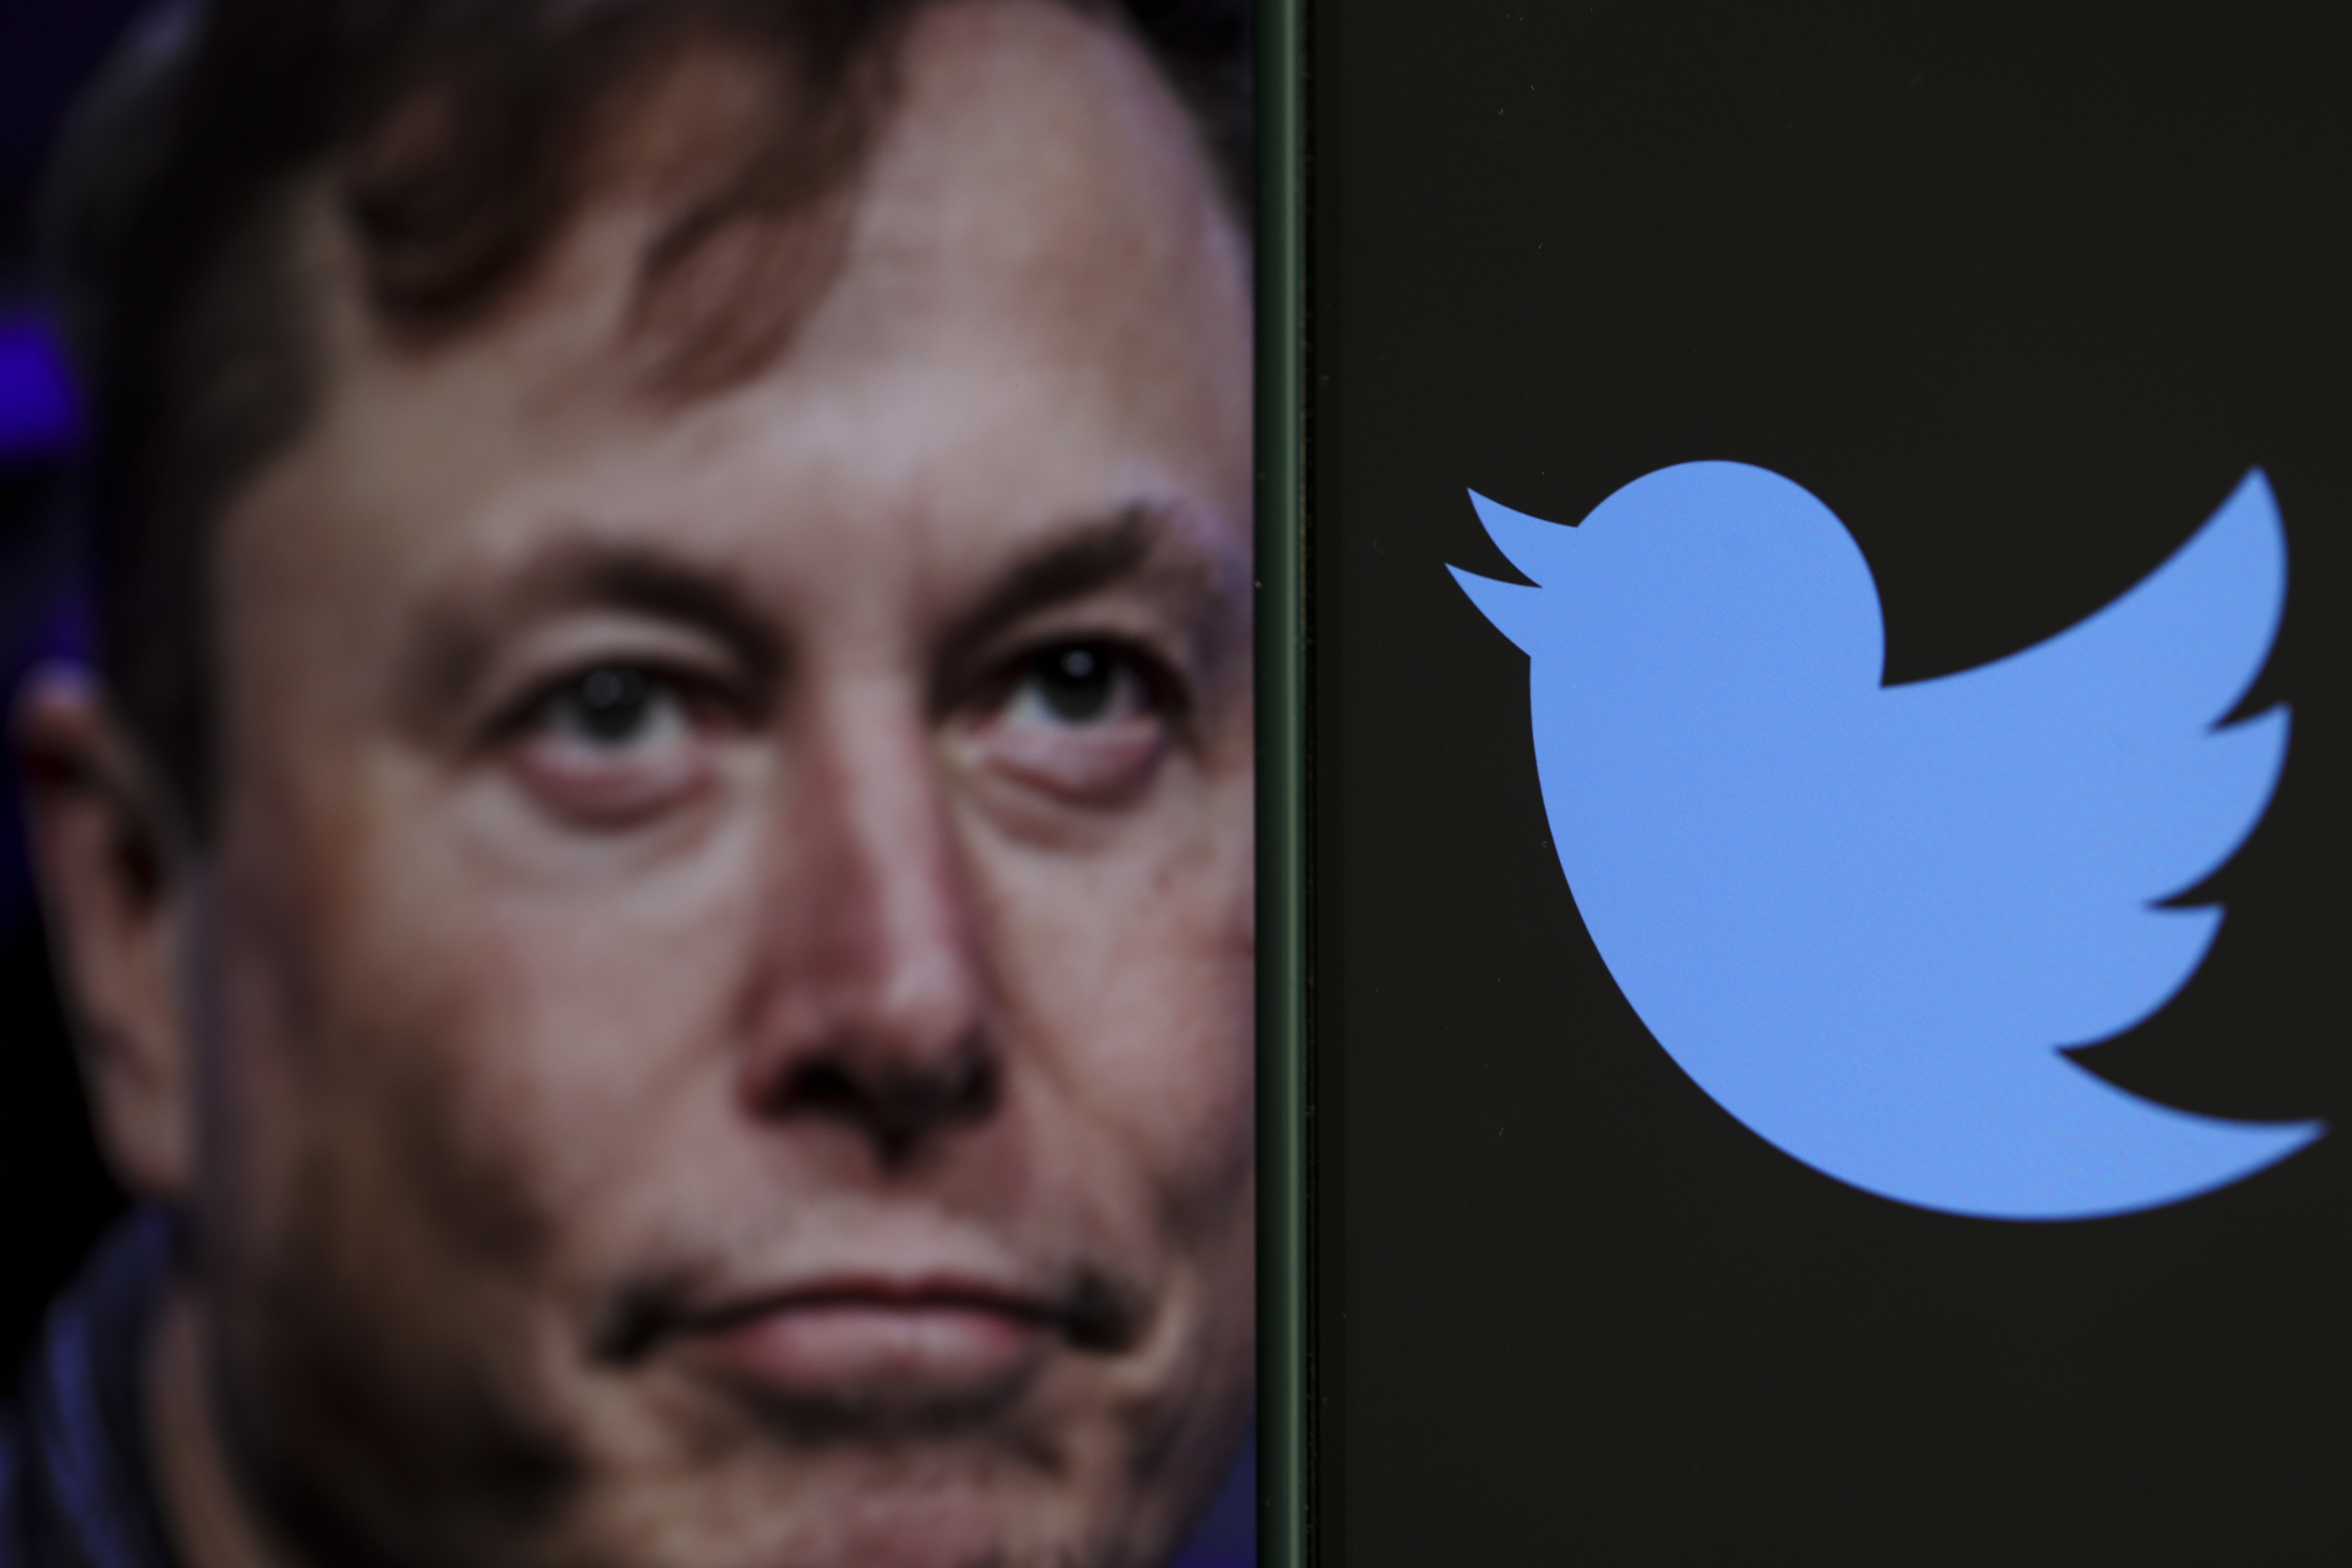 Elon Musk tells Twitter employees that "bankruptcy is not out of the question"